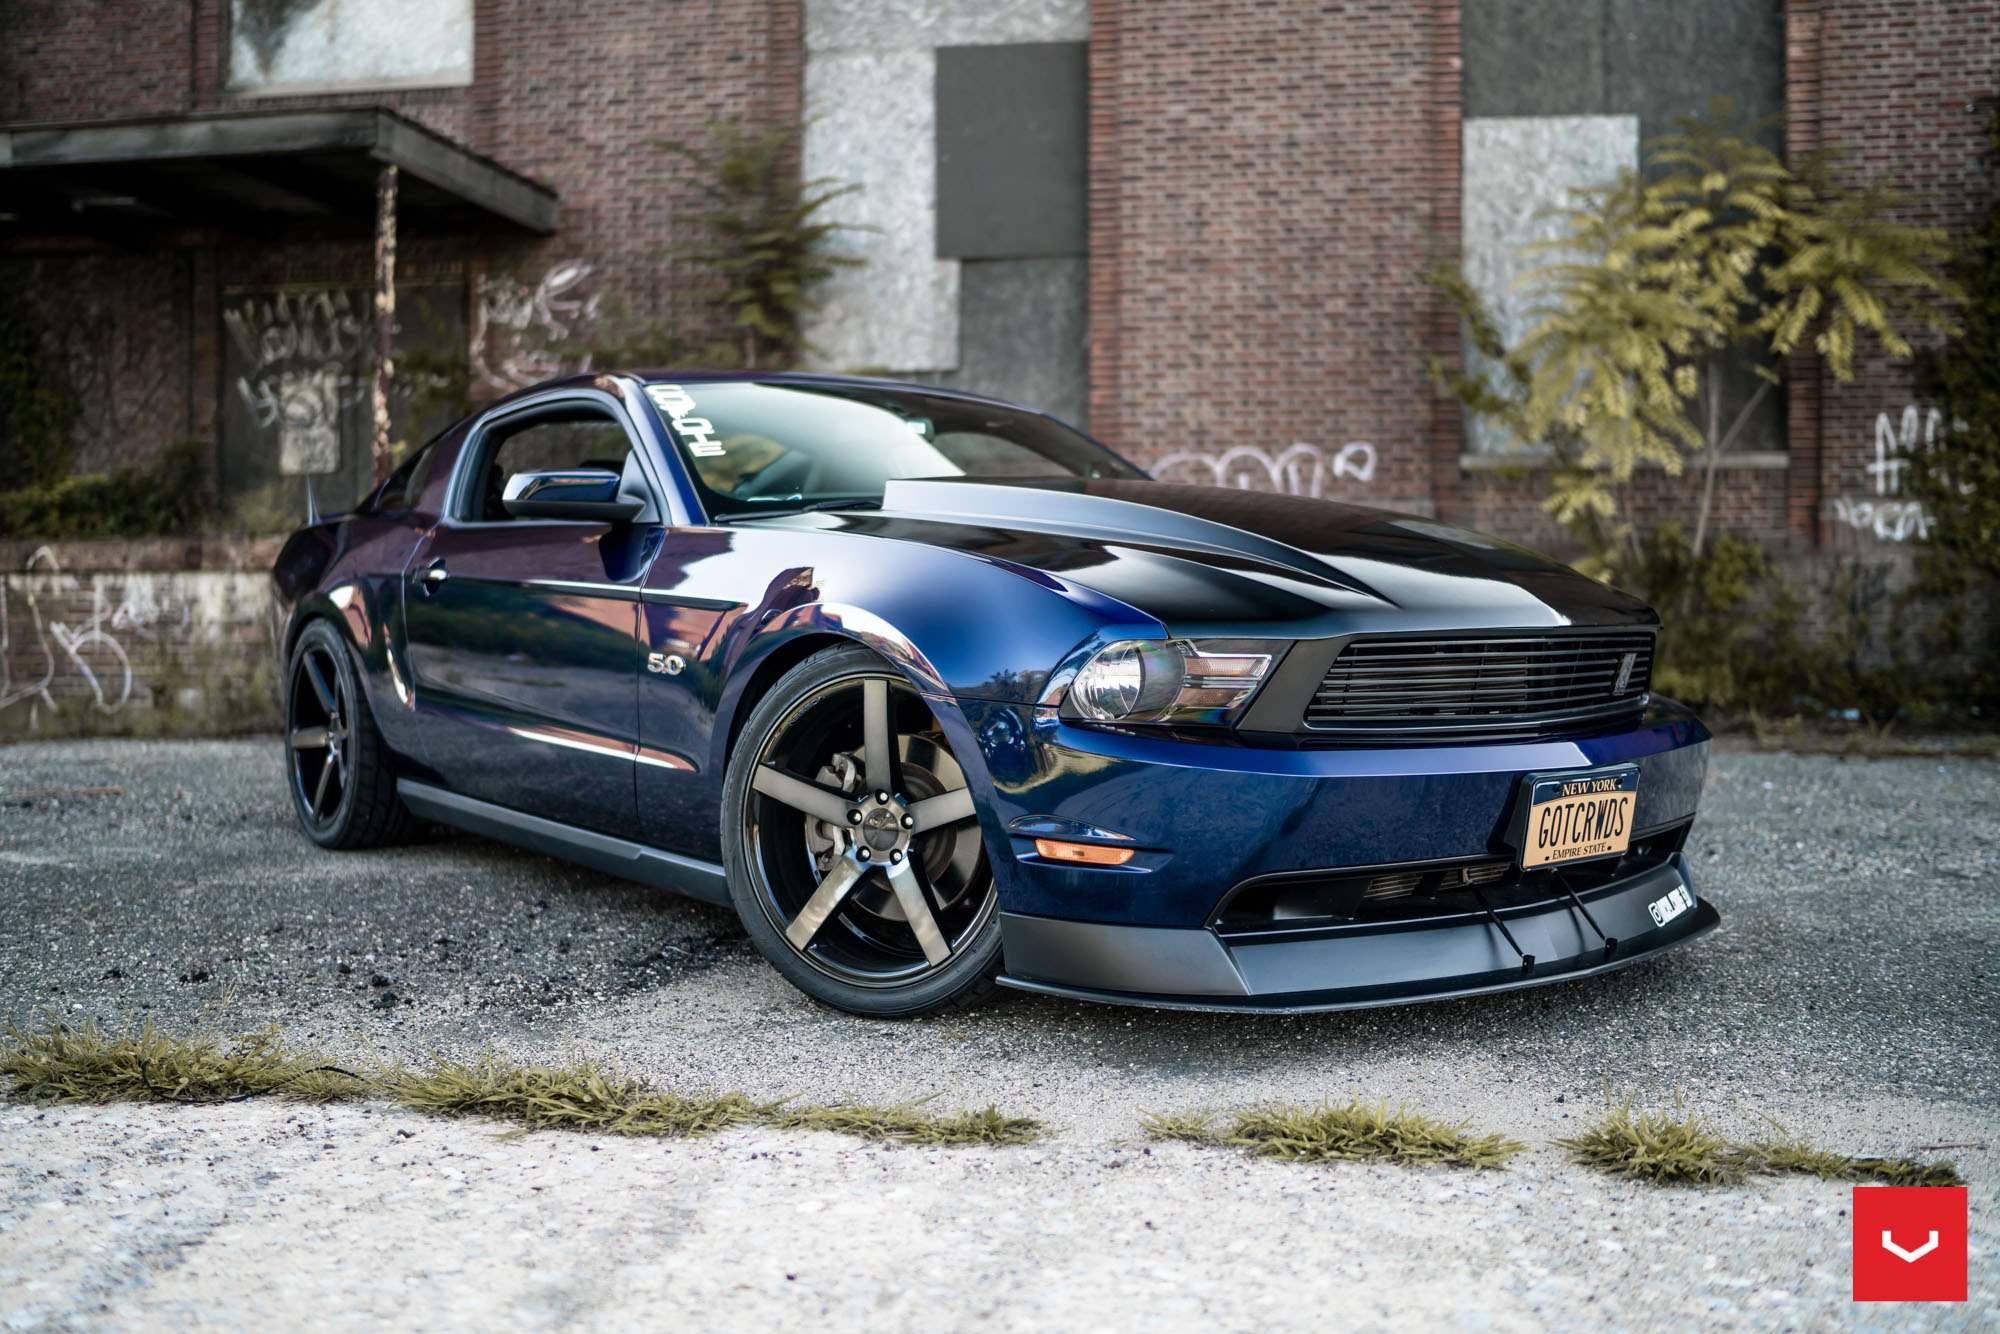 Aftermarket Front Bumper Lip on Blue Ford Mustang - Photo by Vossen